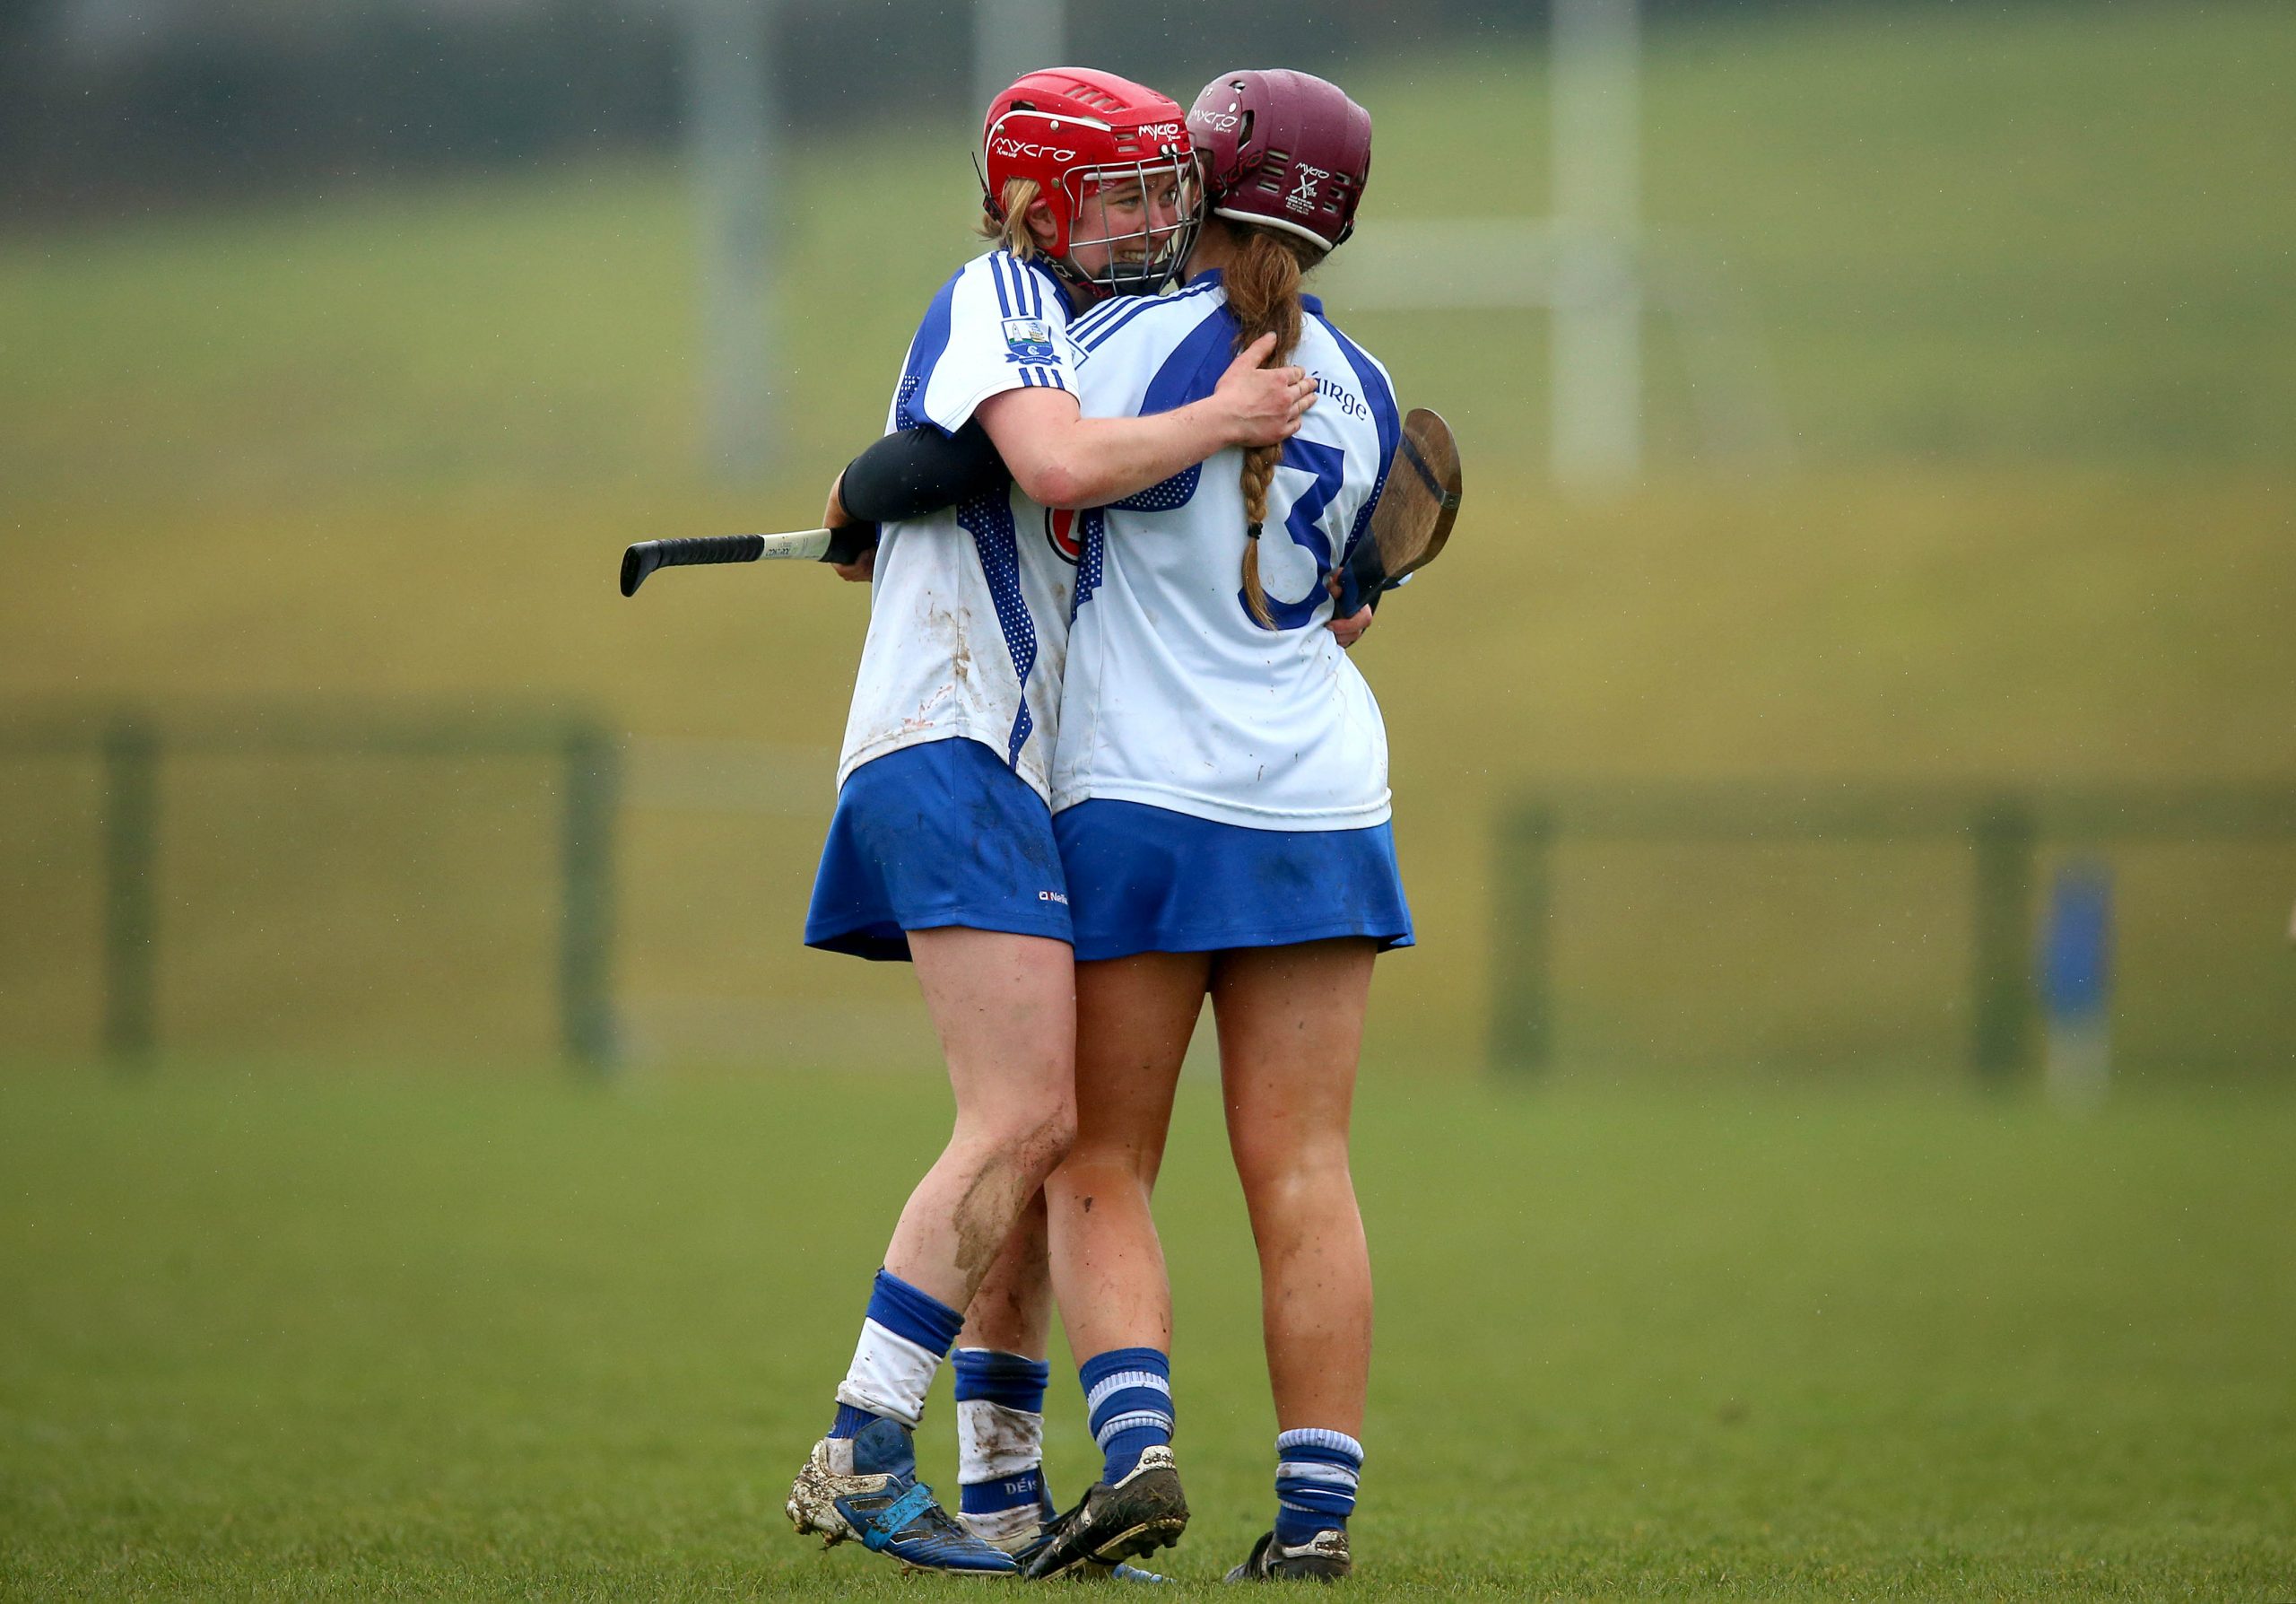 FEATURE: “There’s no way in hell those girls are going to Croke Park for the day out. They’re there to reach an All-Ireland final”